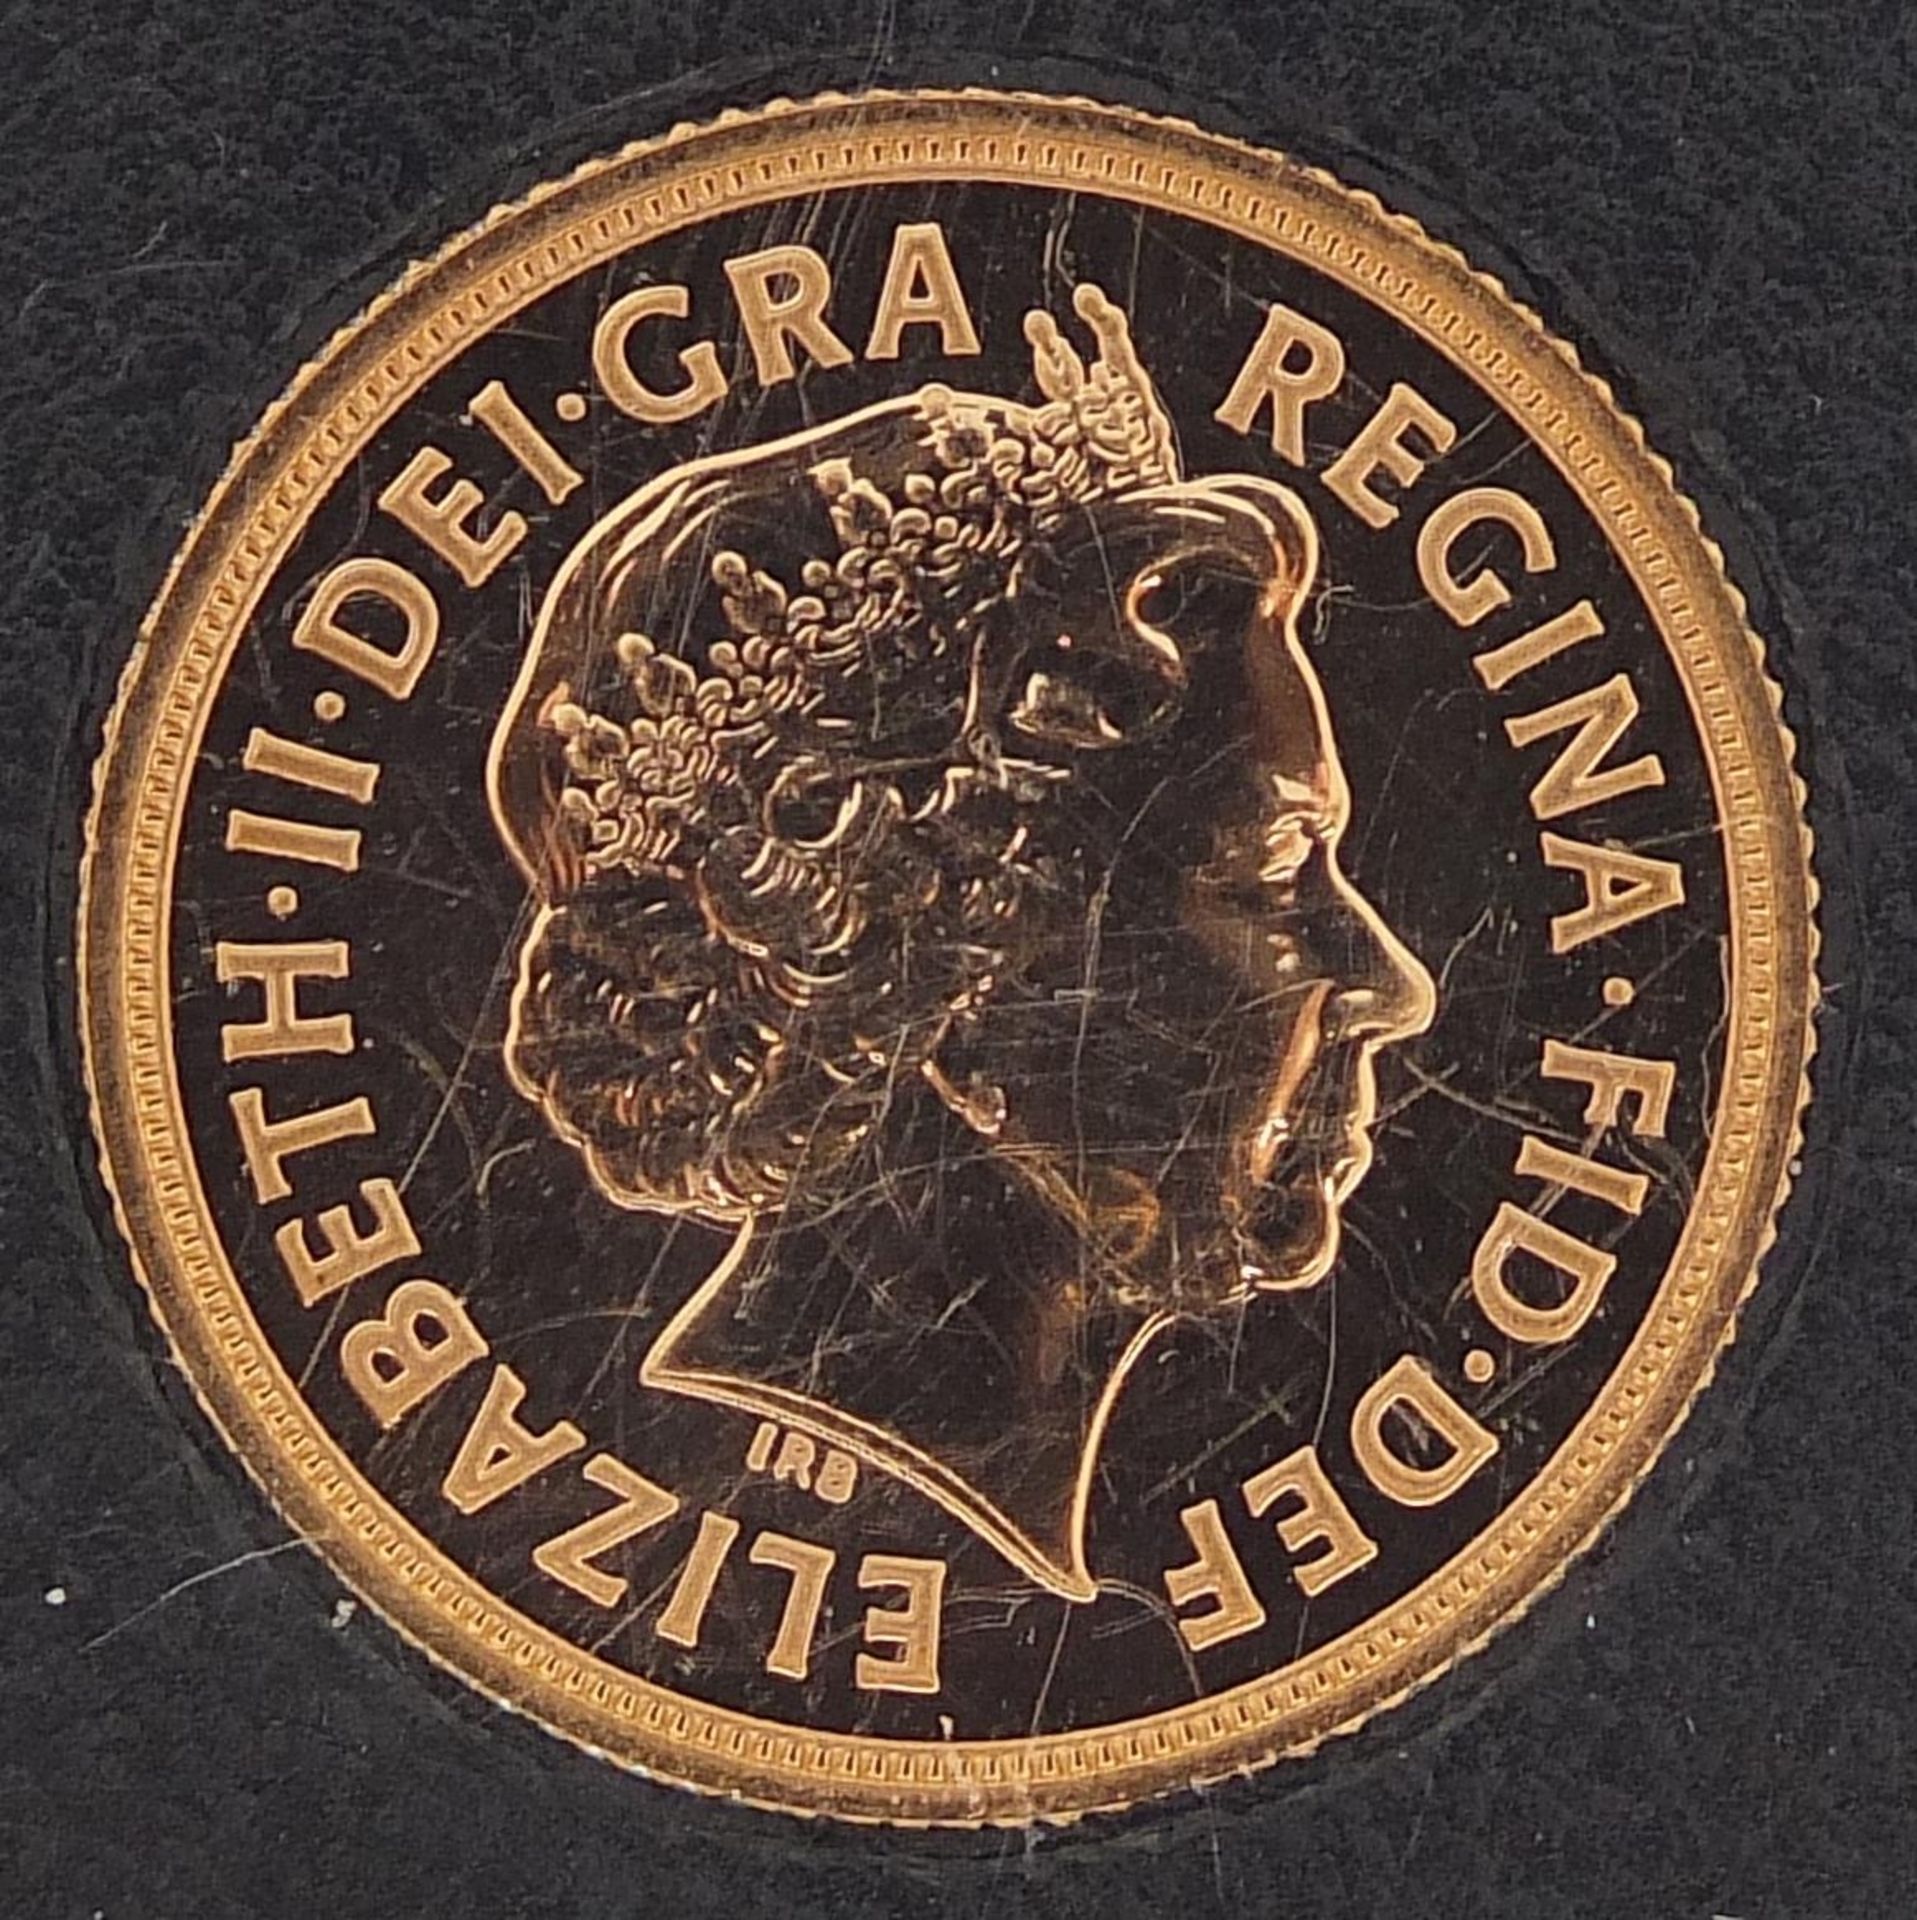 Elizabeth II 2015 gold sovereign housed in portfolio management coin capsule - this lot is sold - Image 3 of 4